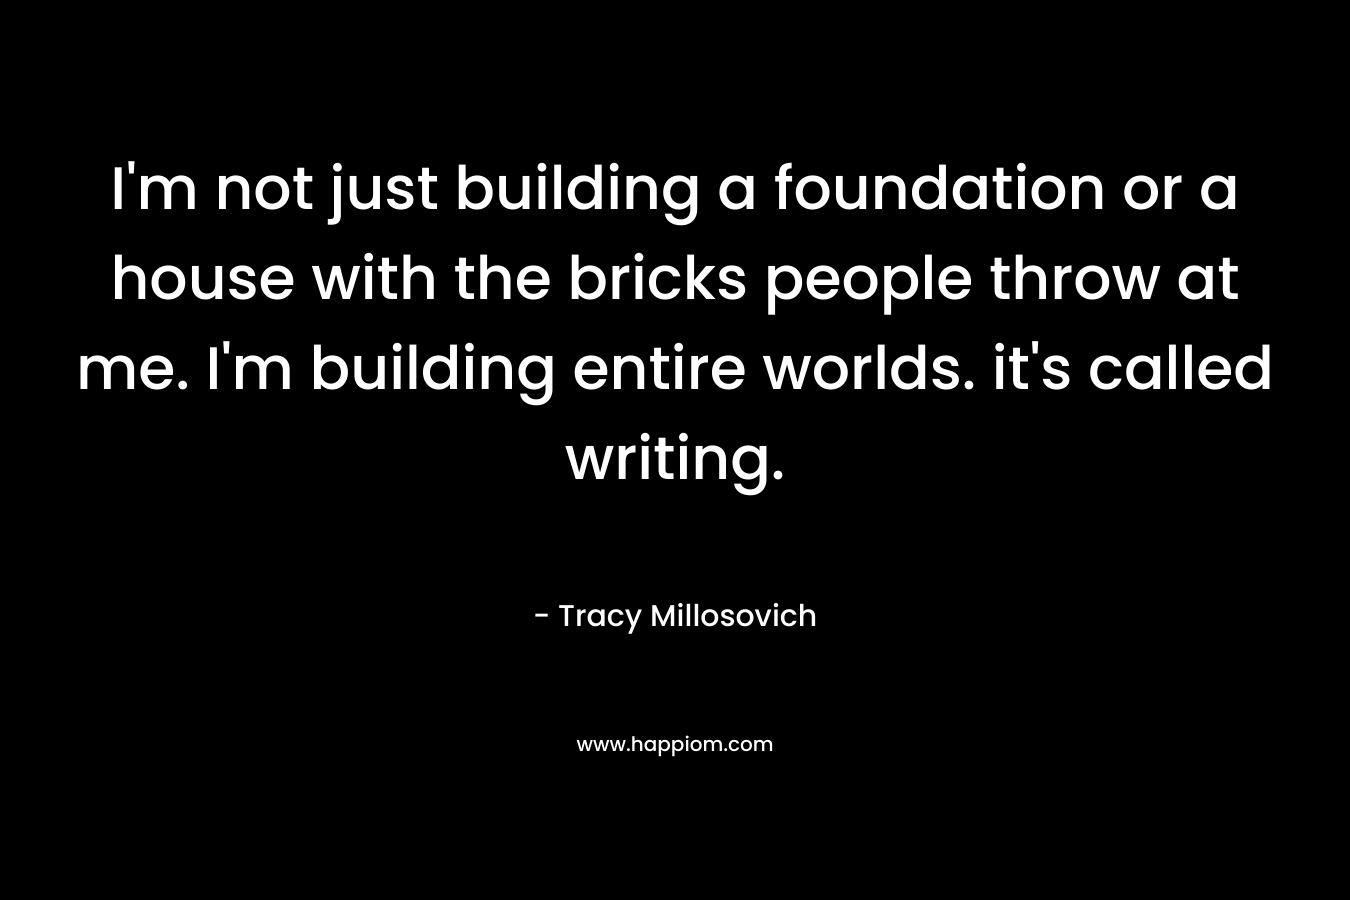 I'm not just building a foundation or a house with the bricks people throw at me. I'm building entire worlds. it's called writing.